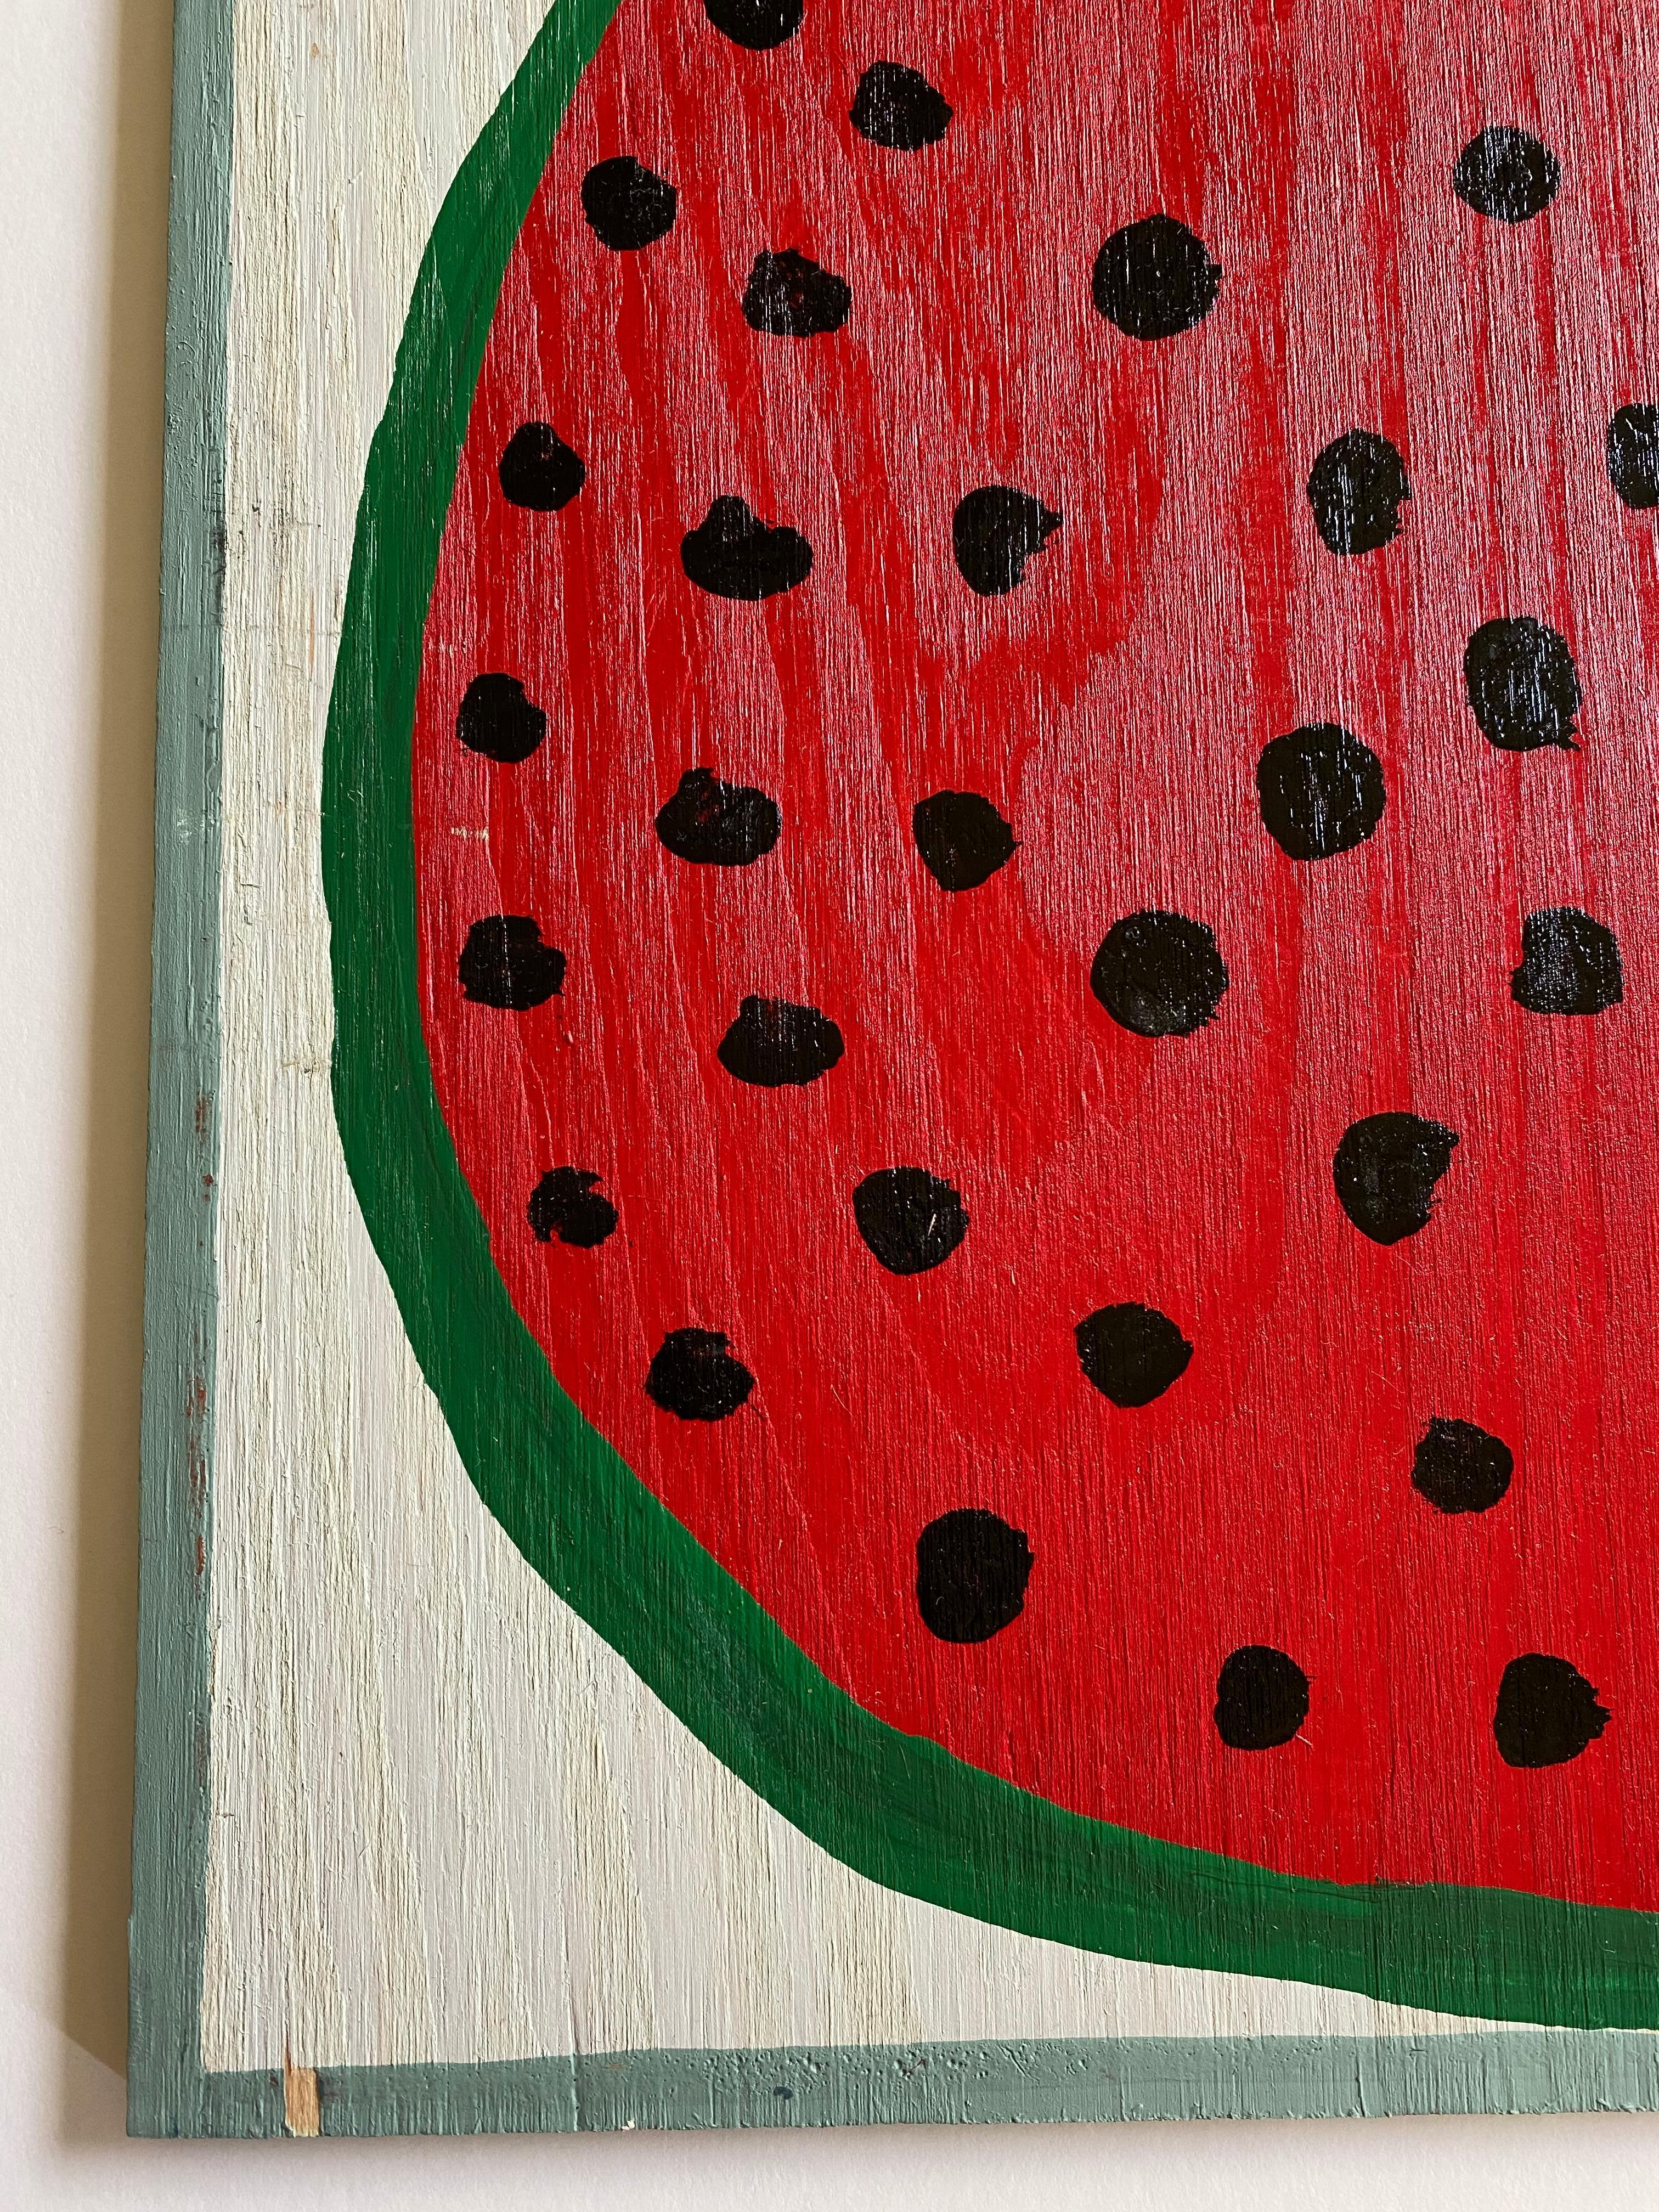 Watermelon - Painting by Mose Tolliver